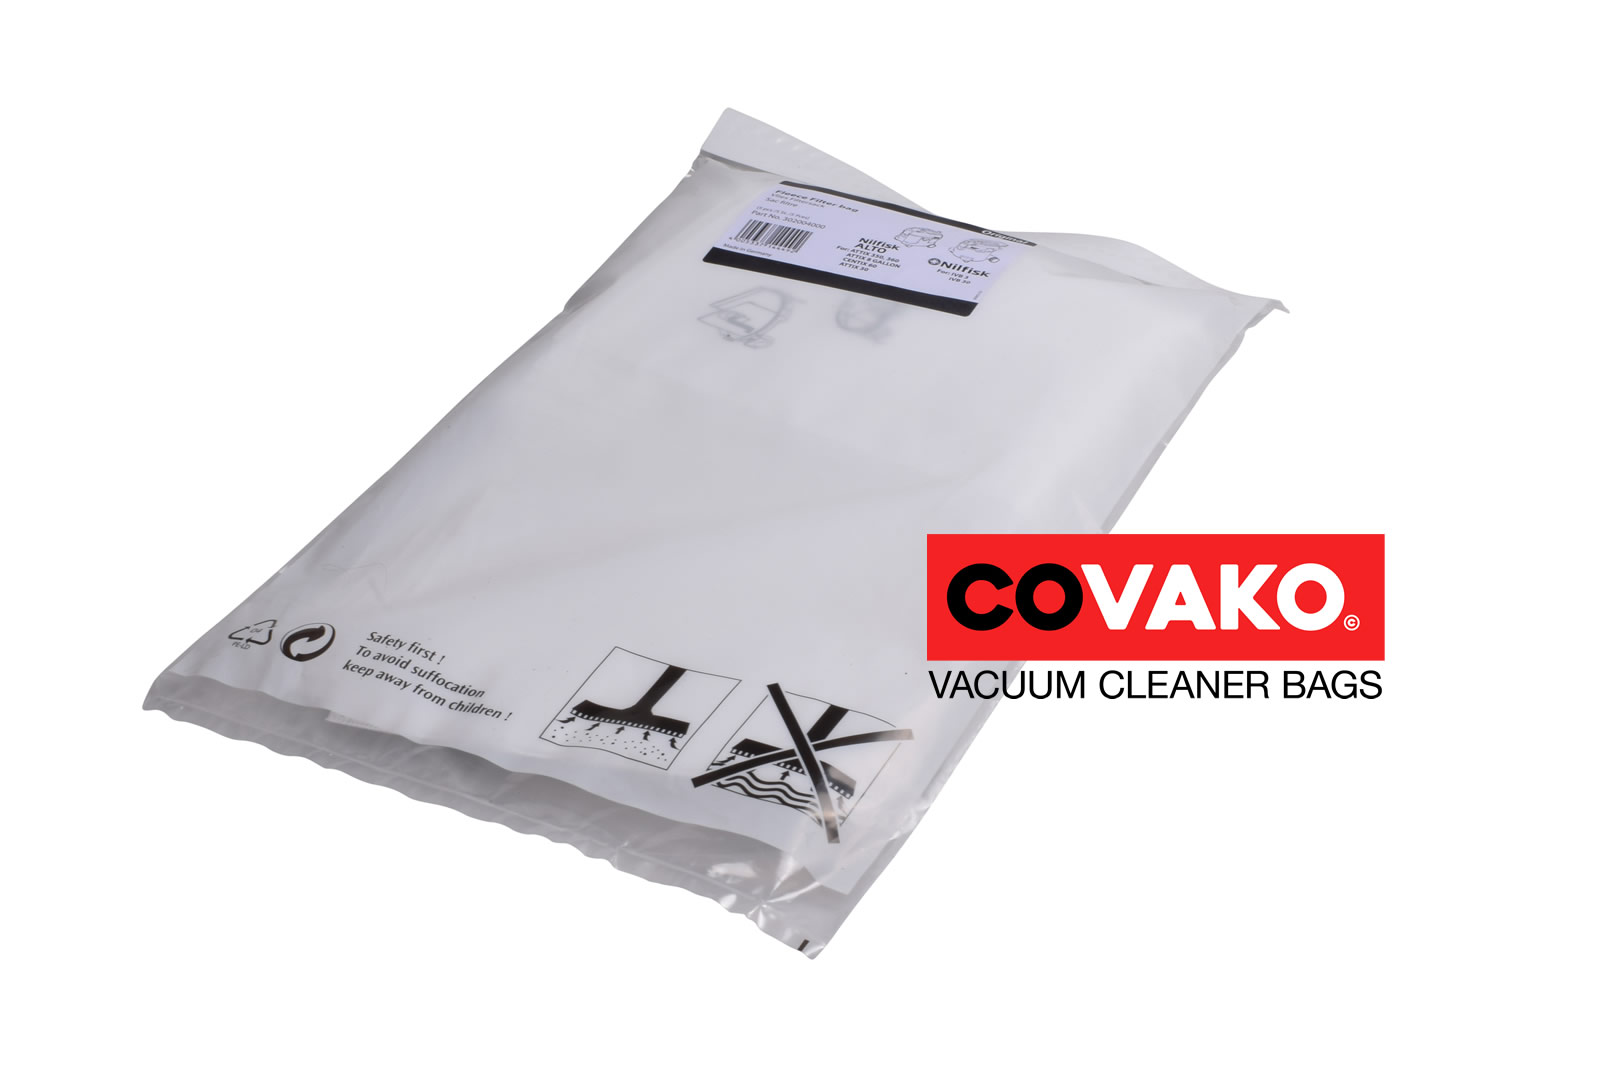 Alto IVB 30 / Synthesis - Alto vacuum cleaner bags